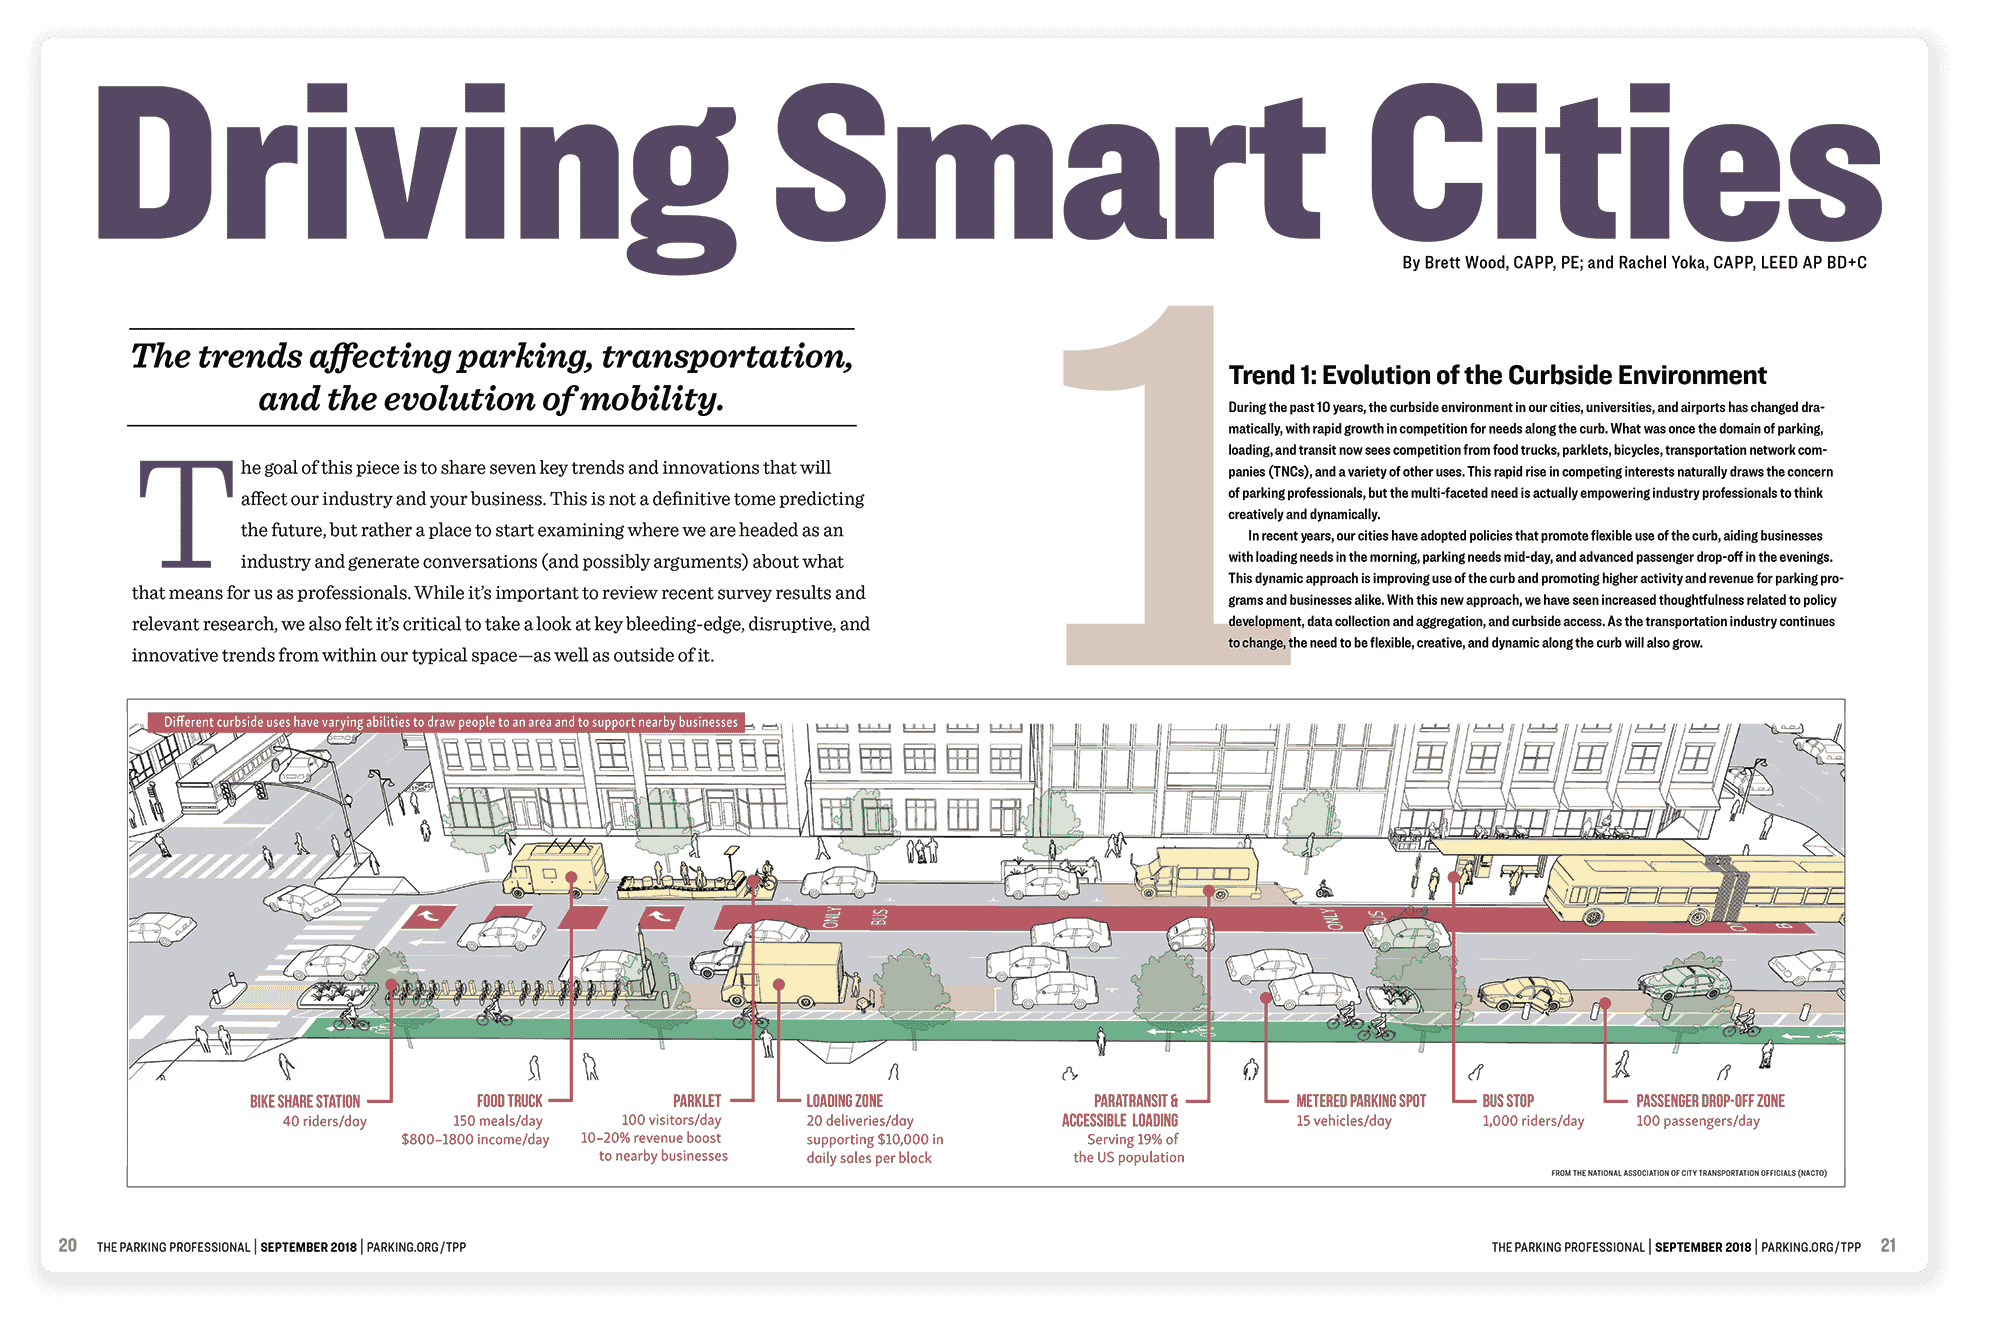 The Parking Professional - Driving Smart Cities